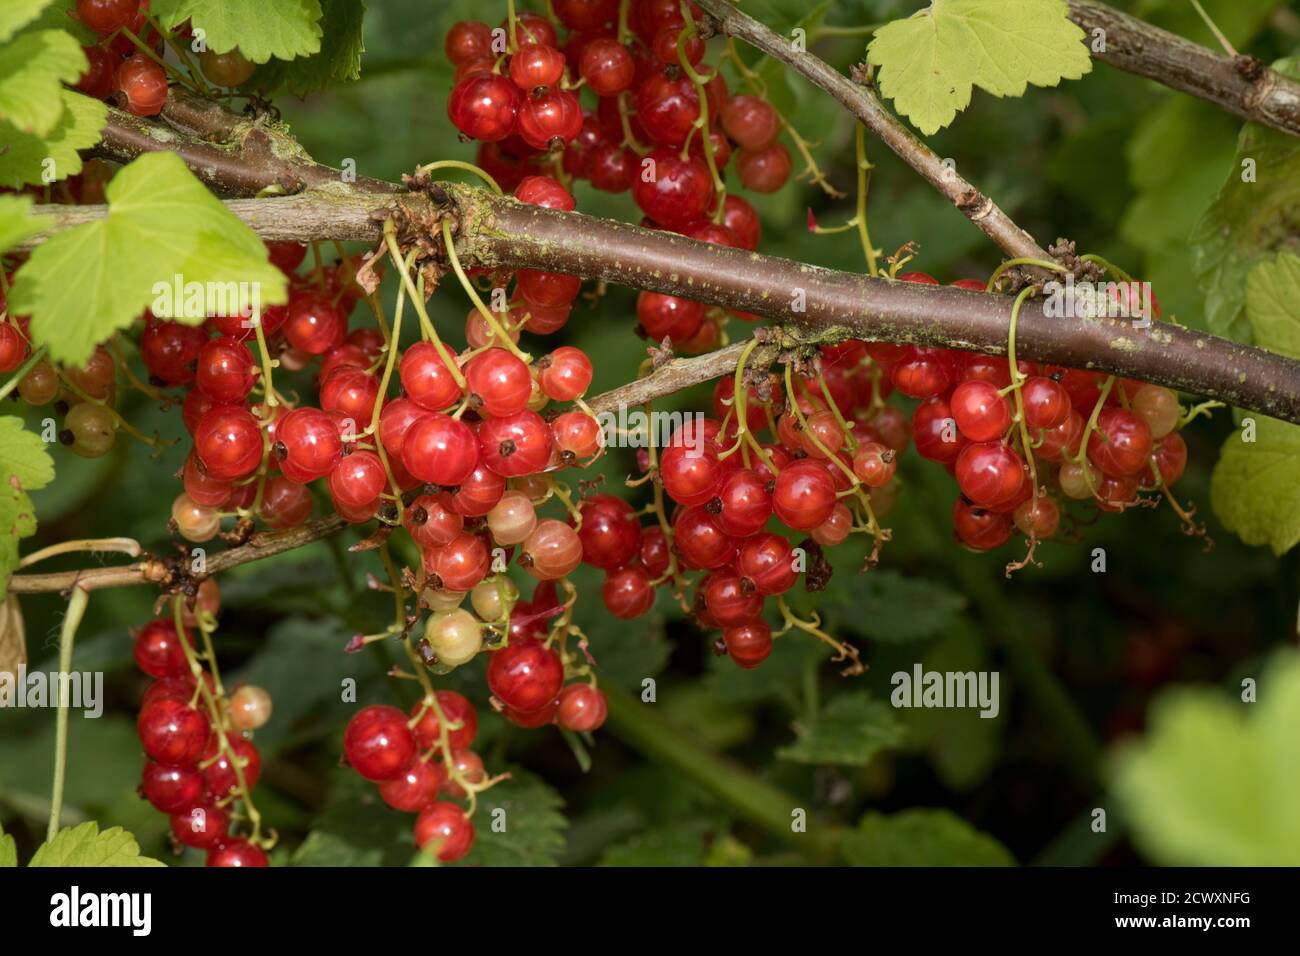 Redcurrant (Ribes rubrum) edible fruit berries on racemes among the leaves on a currant bush, Berkshire, June Stock Photo